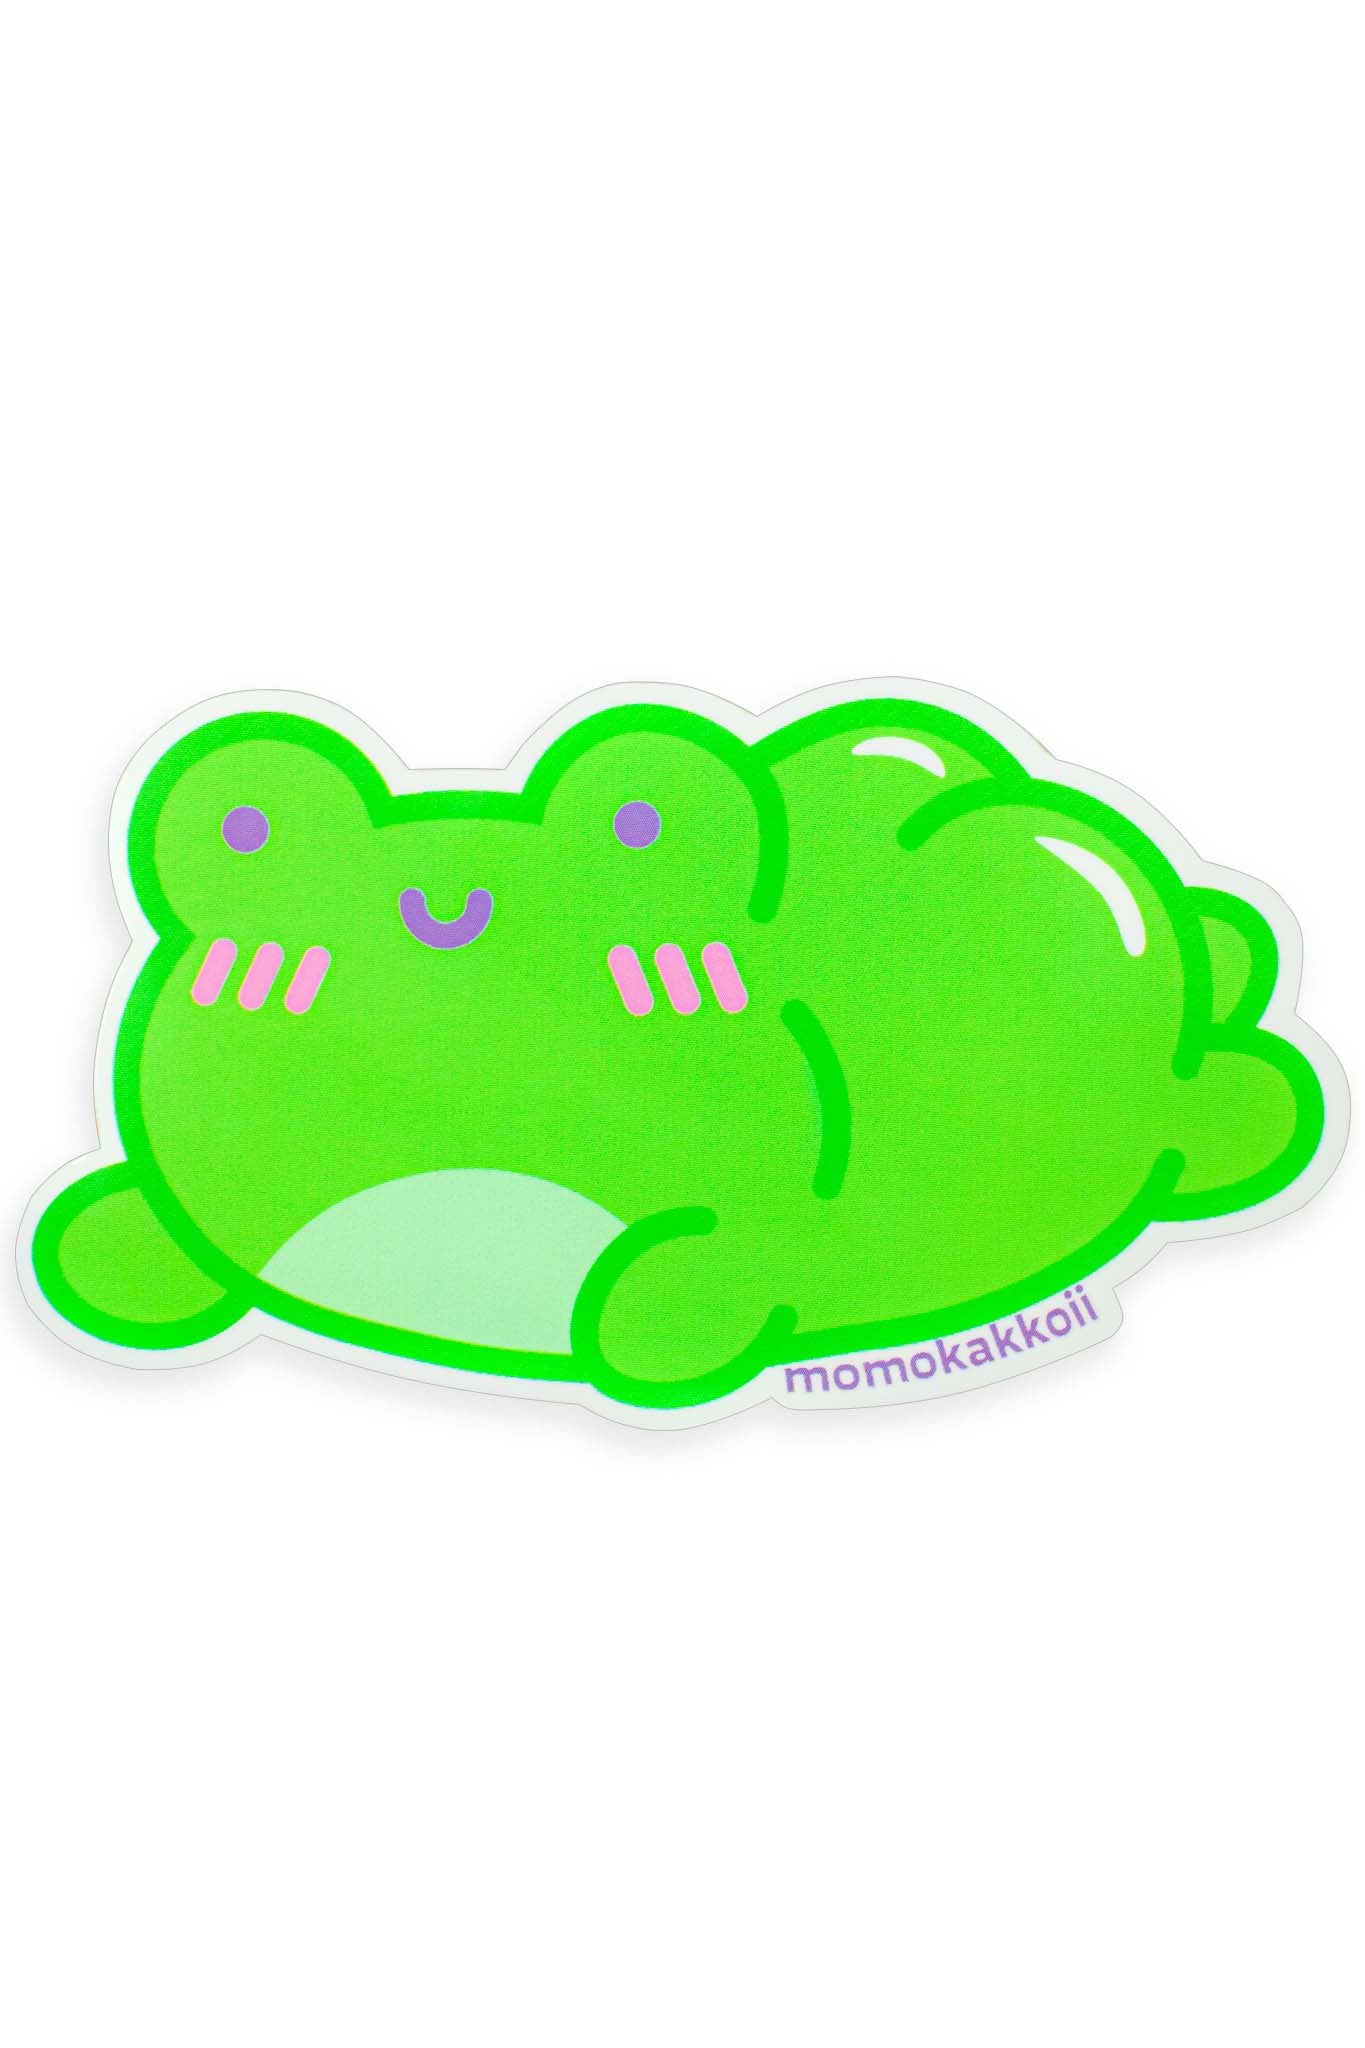 Thicc Frog Stickers